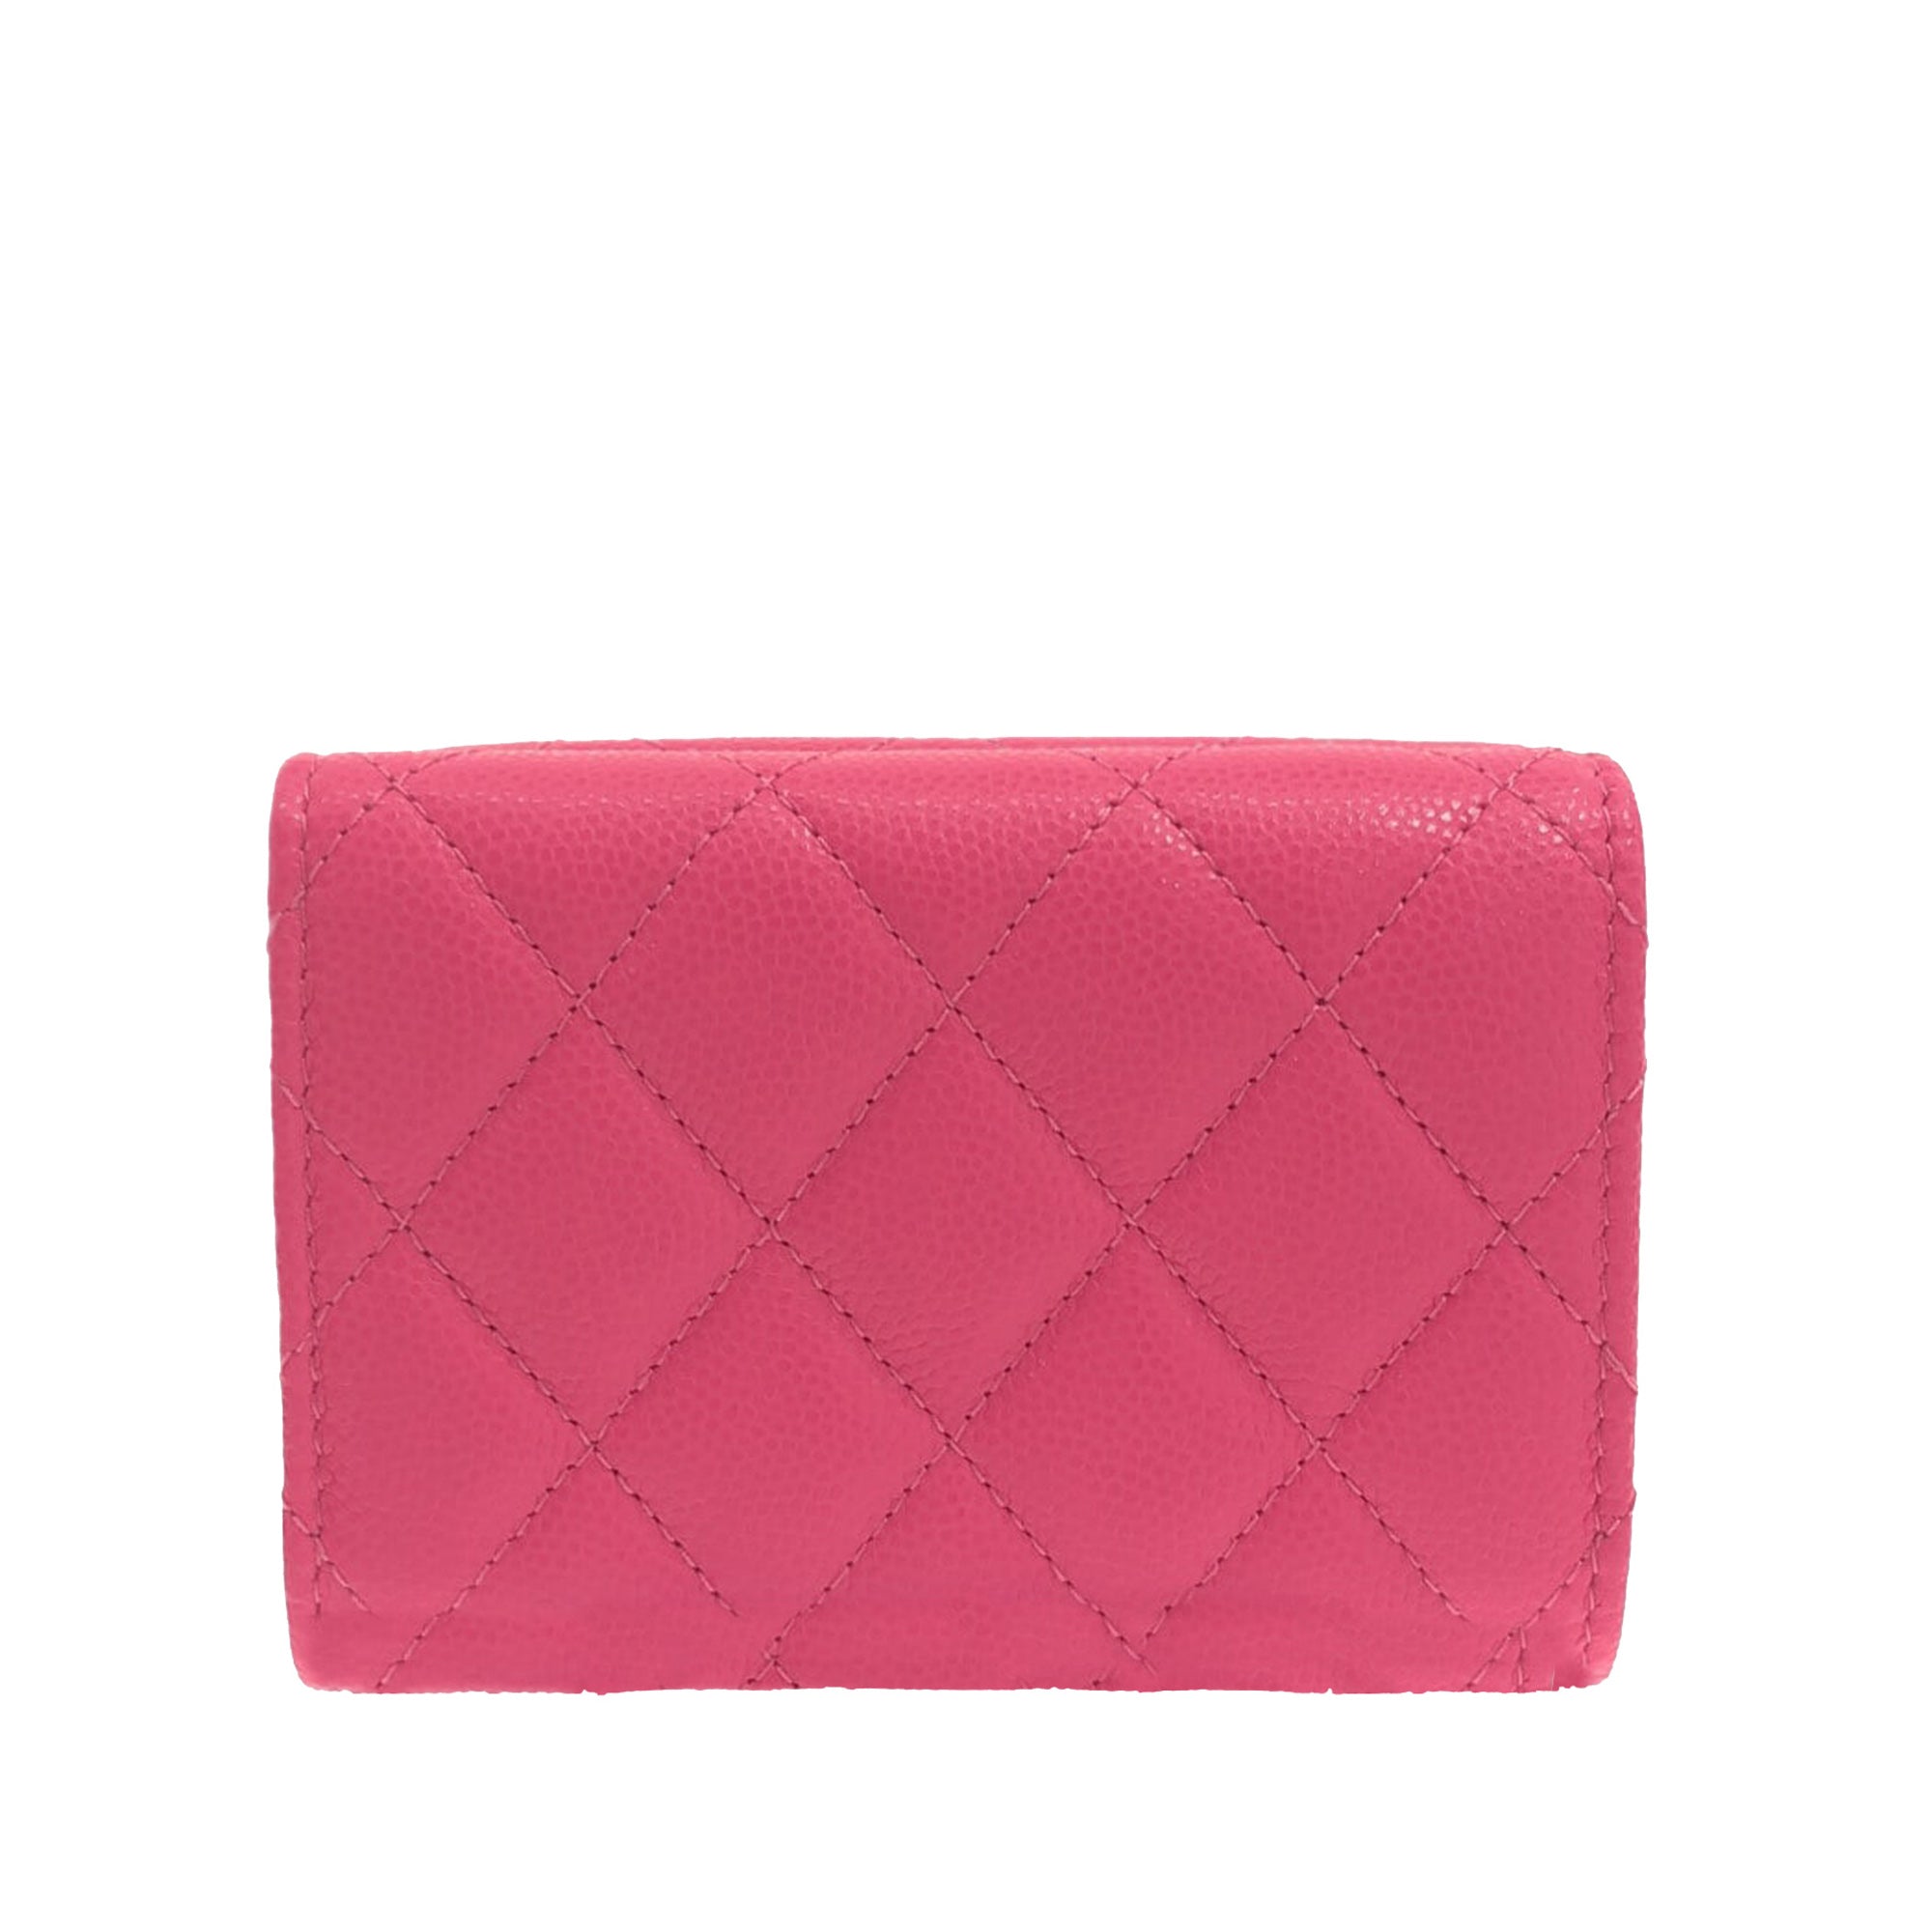 Pink Chanel CC Caviar Leather Wallet